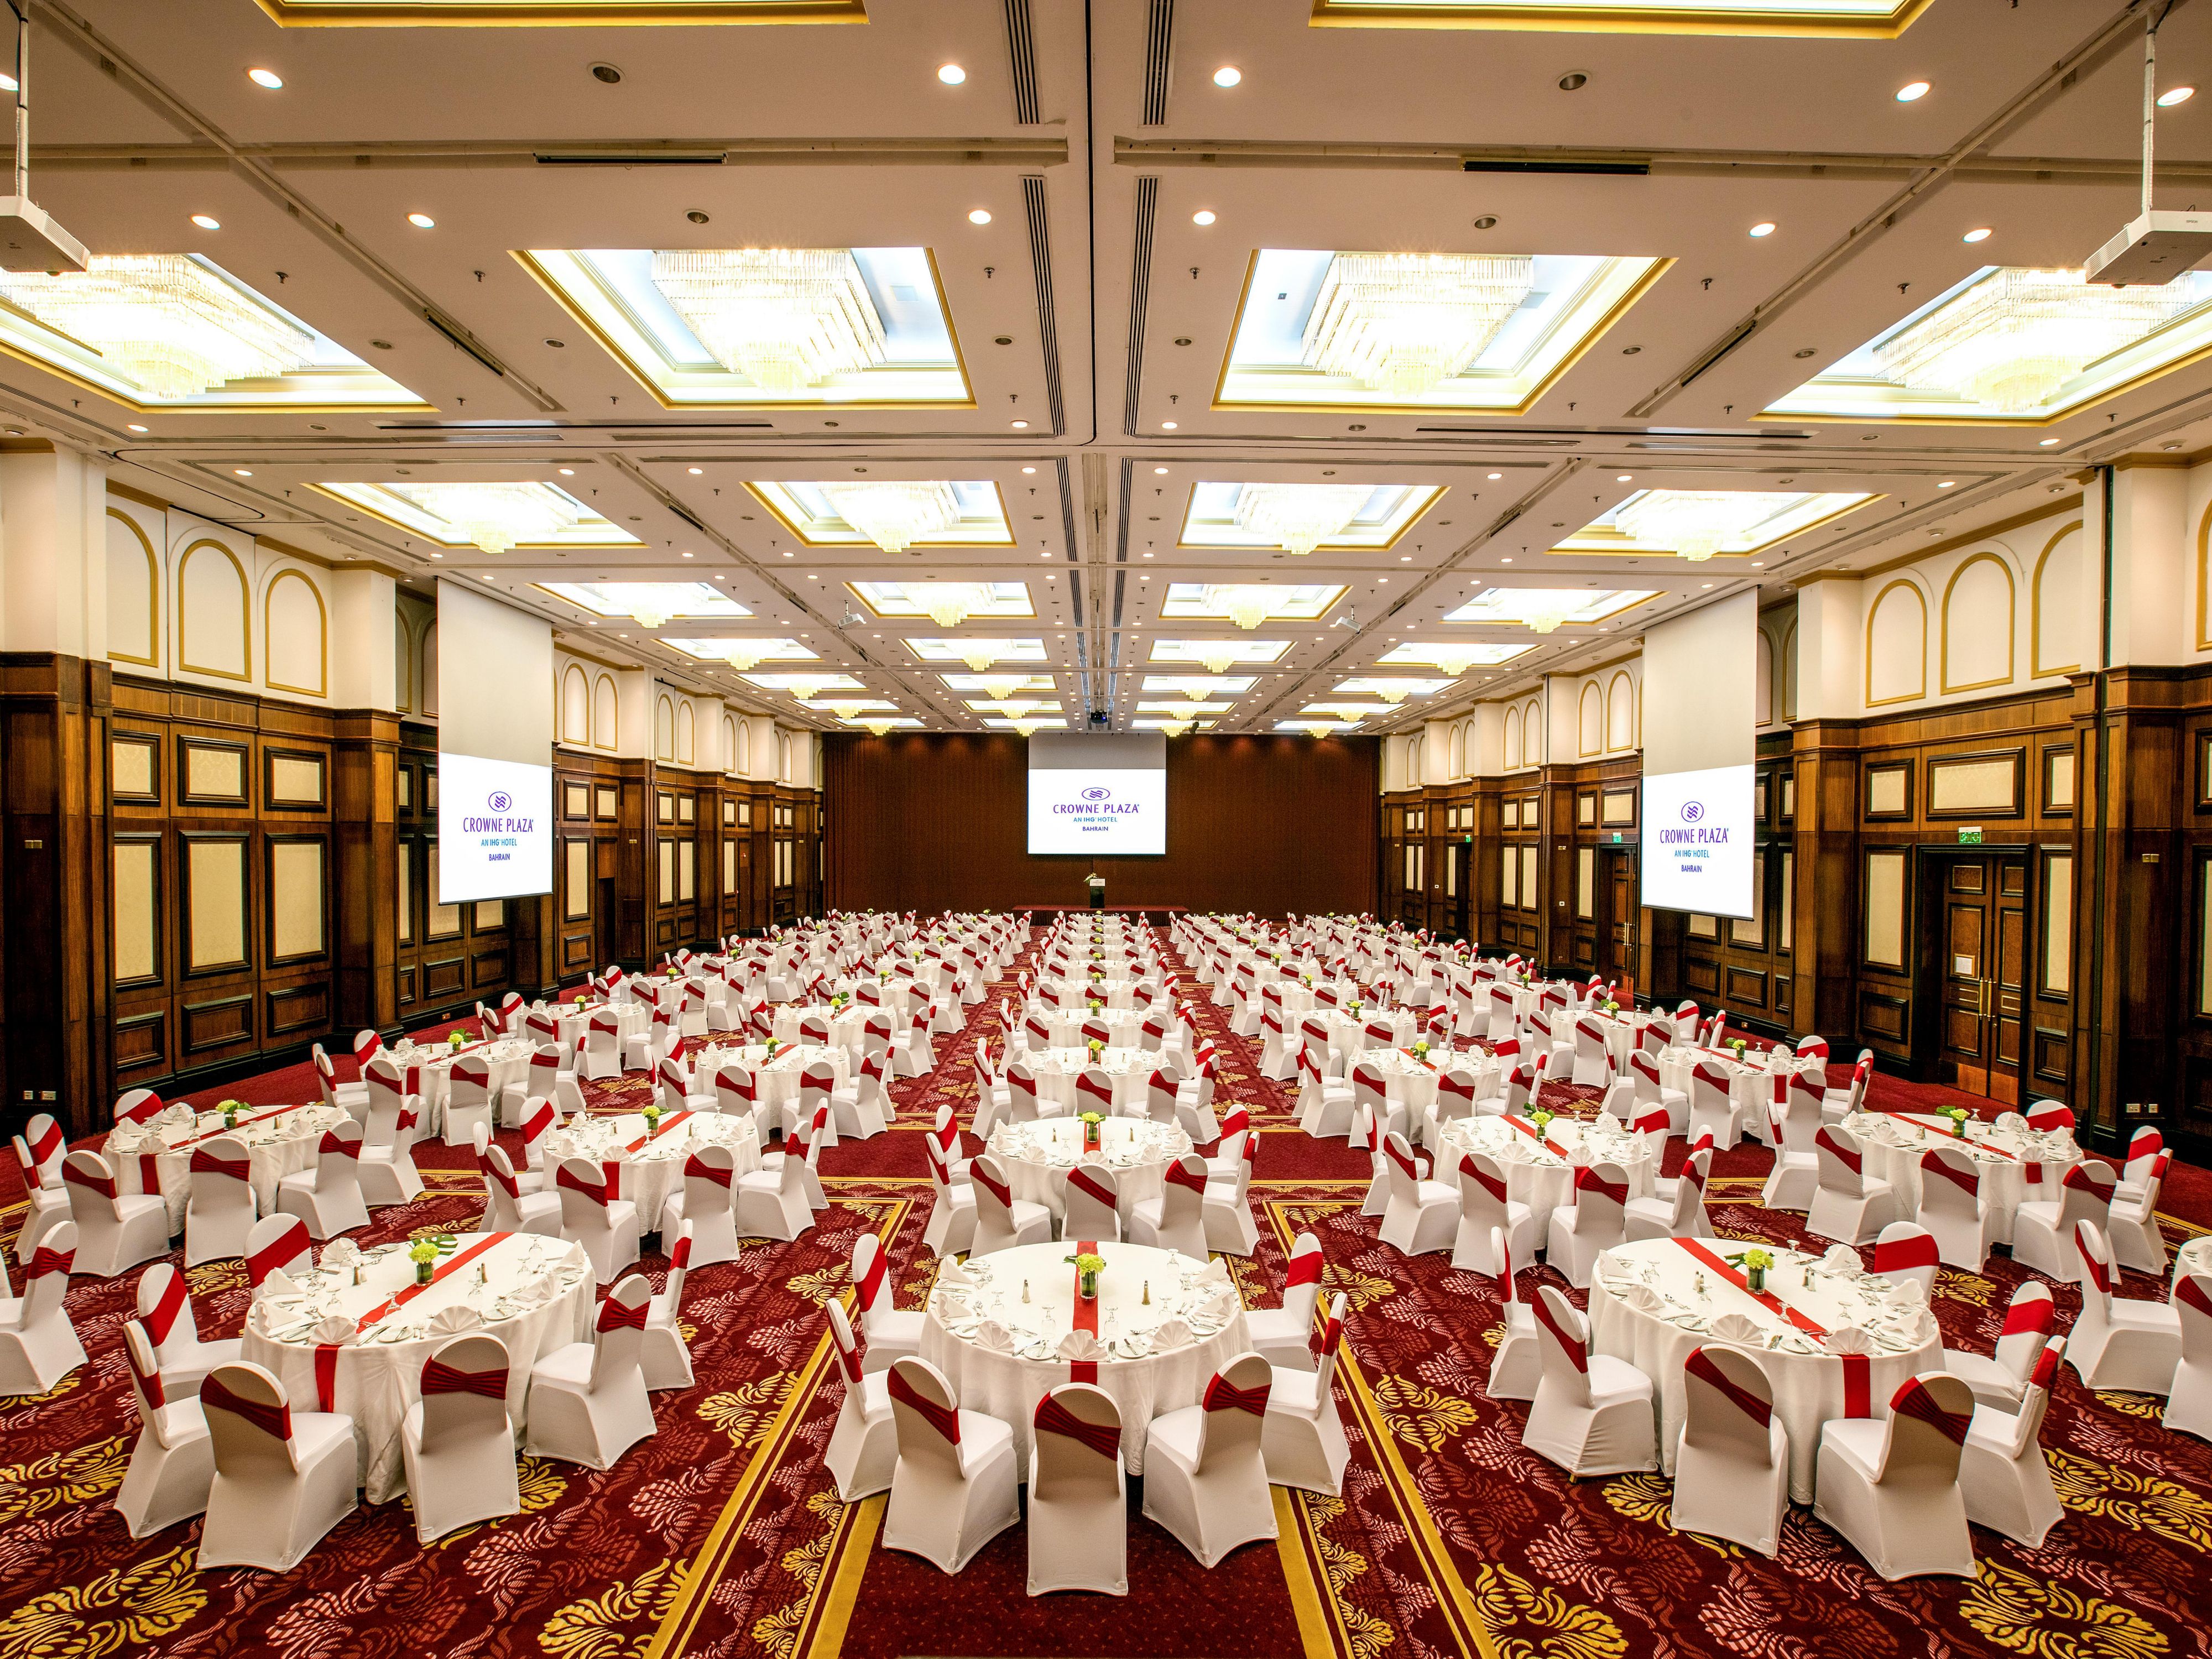 Bahrain Conference Centre, is a leading venue for conferences
and exhibitions, catering to more than 2000 delegates.
Supporting the 1,200 square meters of primary conference and
banqueting area, is a further 8 individually appointed meeting
rooms, a VIP lounge and a large lobby and pre-function area.